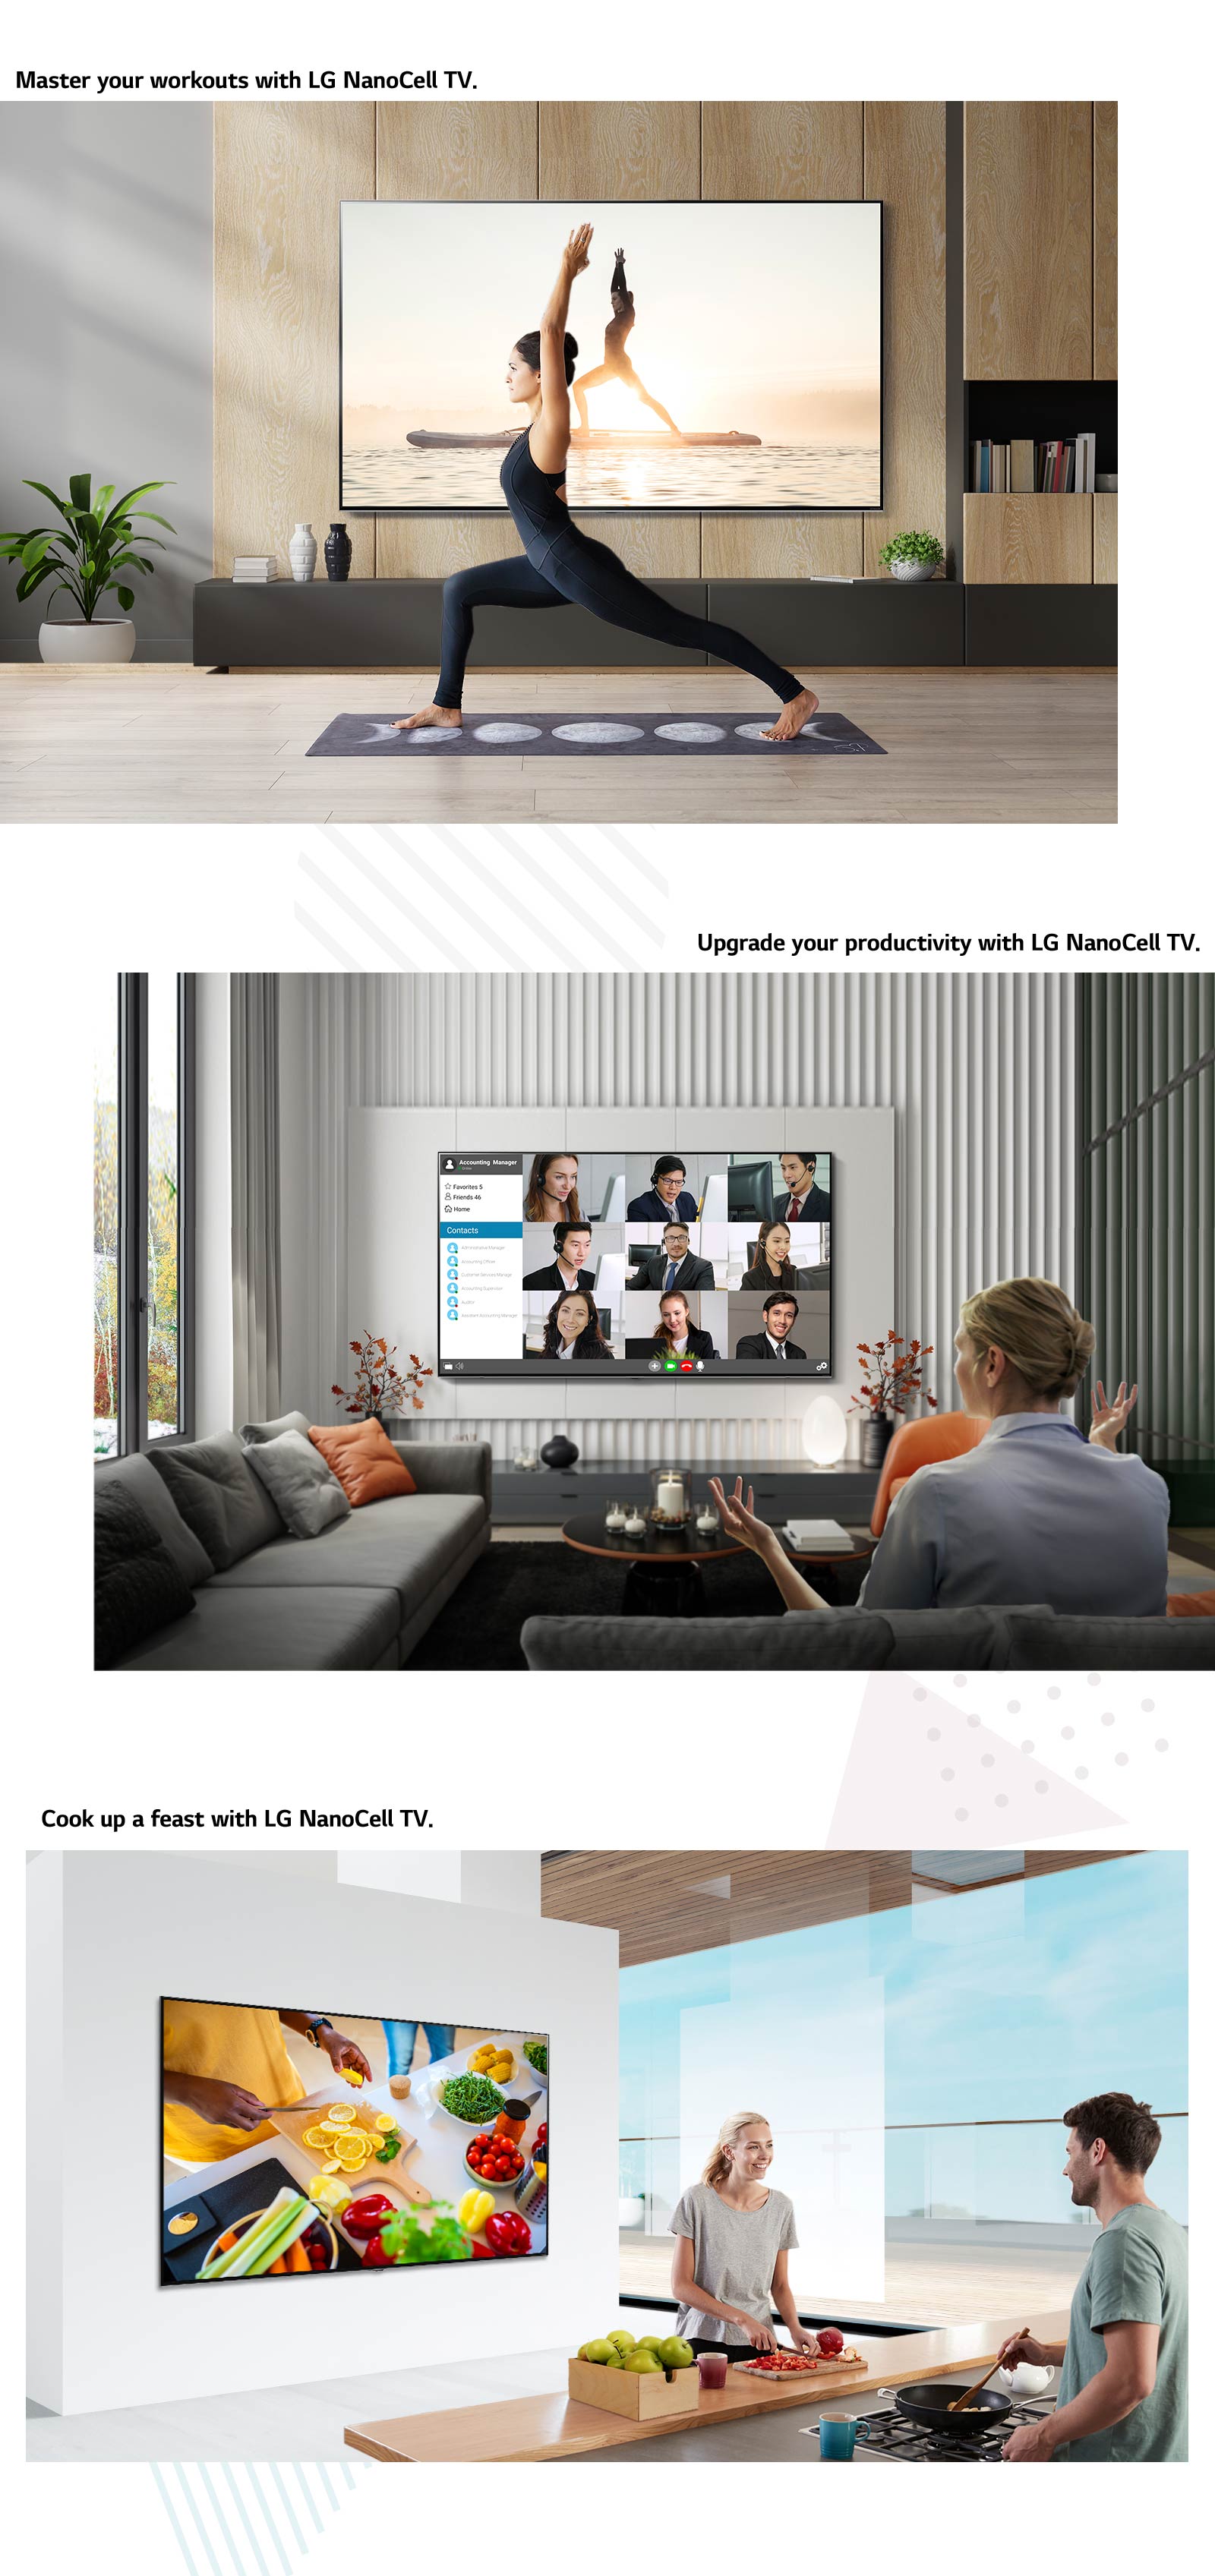 Woman doing yoga in the middle of a room in front of a large flatscreen wall-mounted TV. Rear view of a woman holding a video meeting with participants shown on the wall-mounted flatscreen TV. A man and woman cooking together in front of a large wall mounted TV.